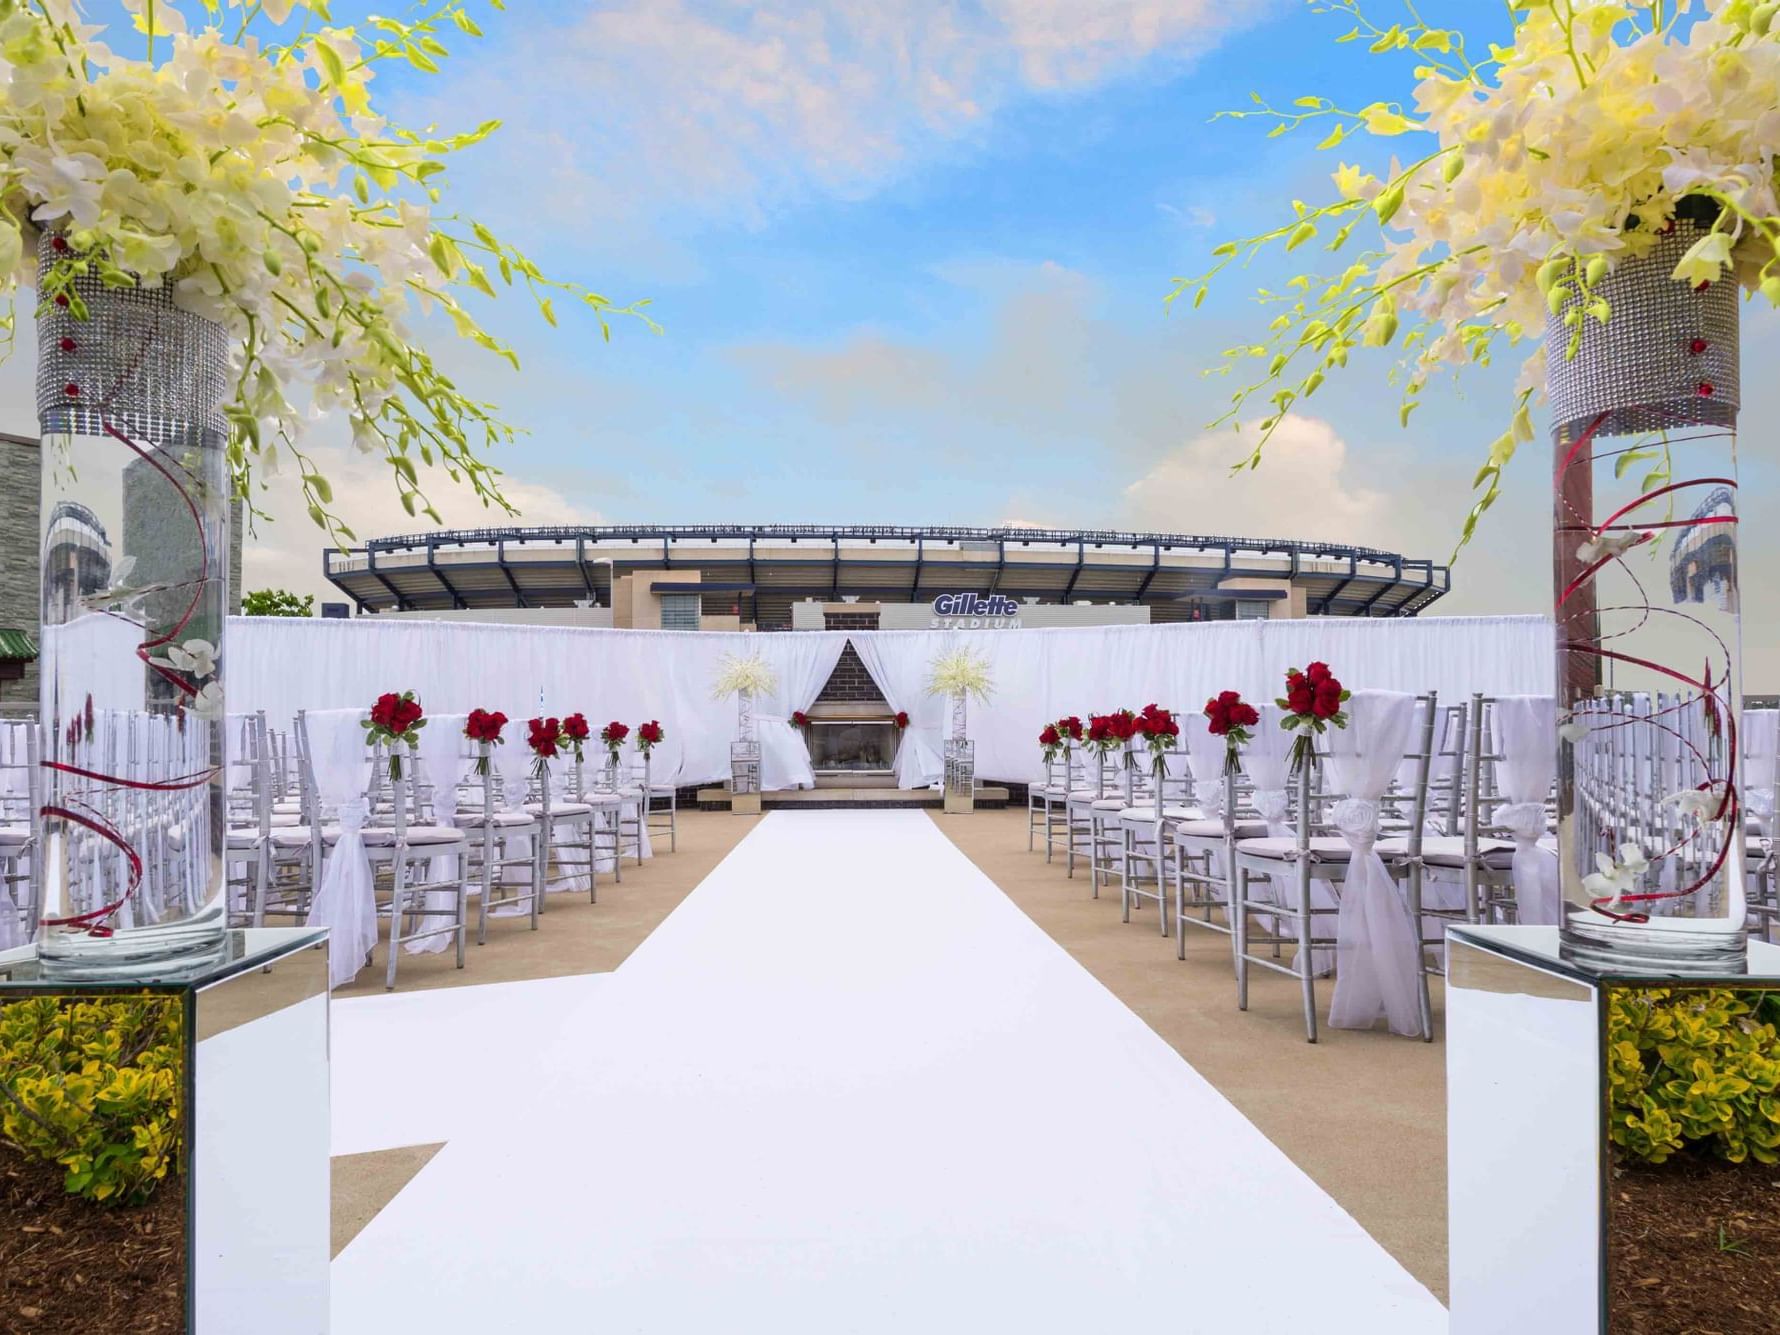 chairs and aisle set for outdoor wedding